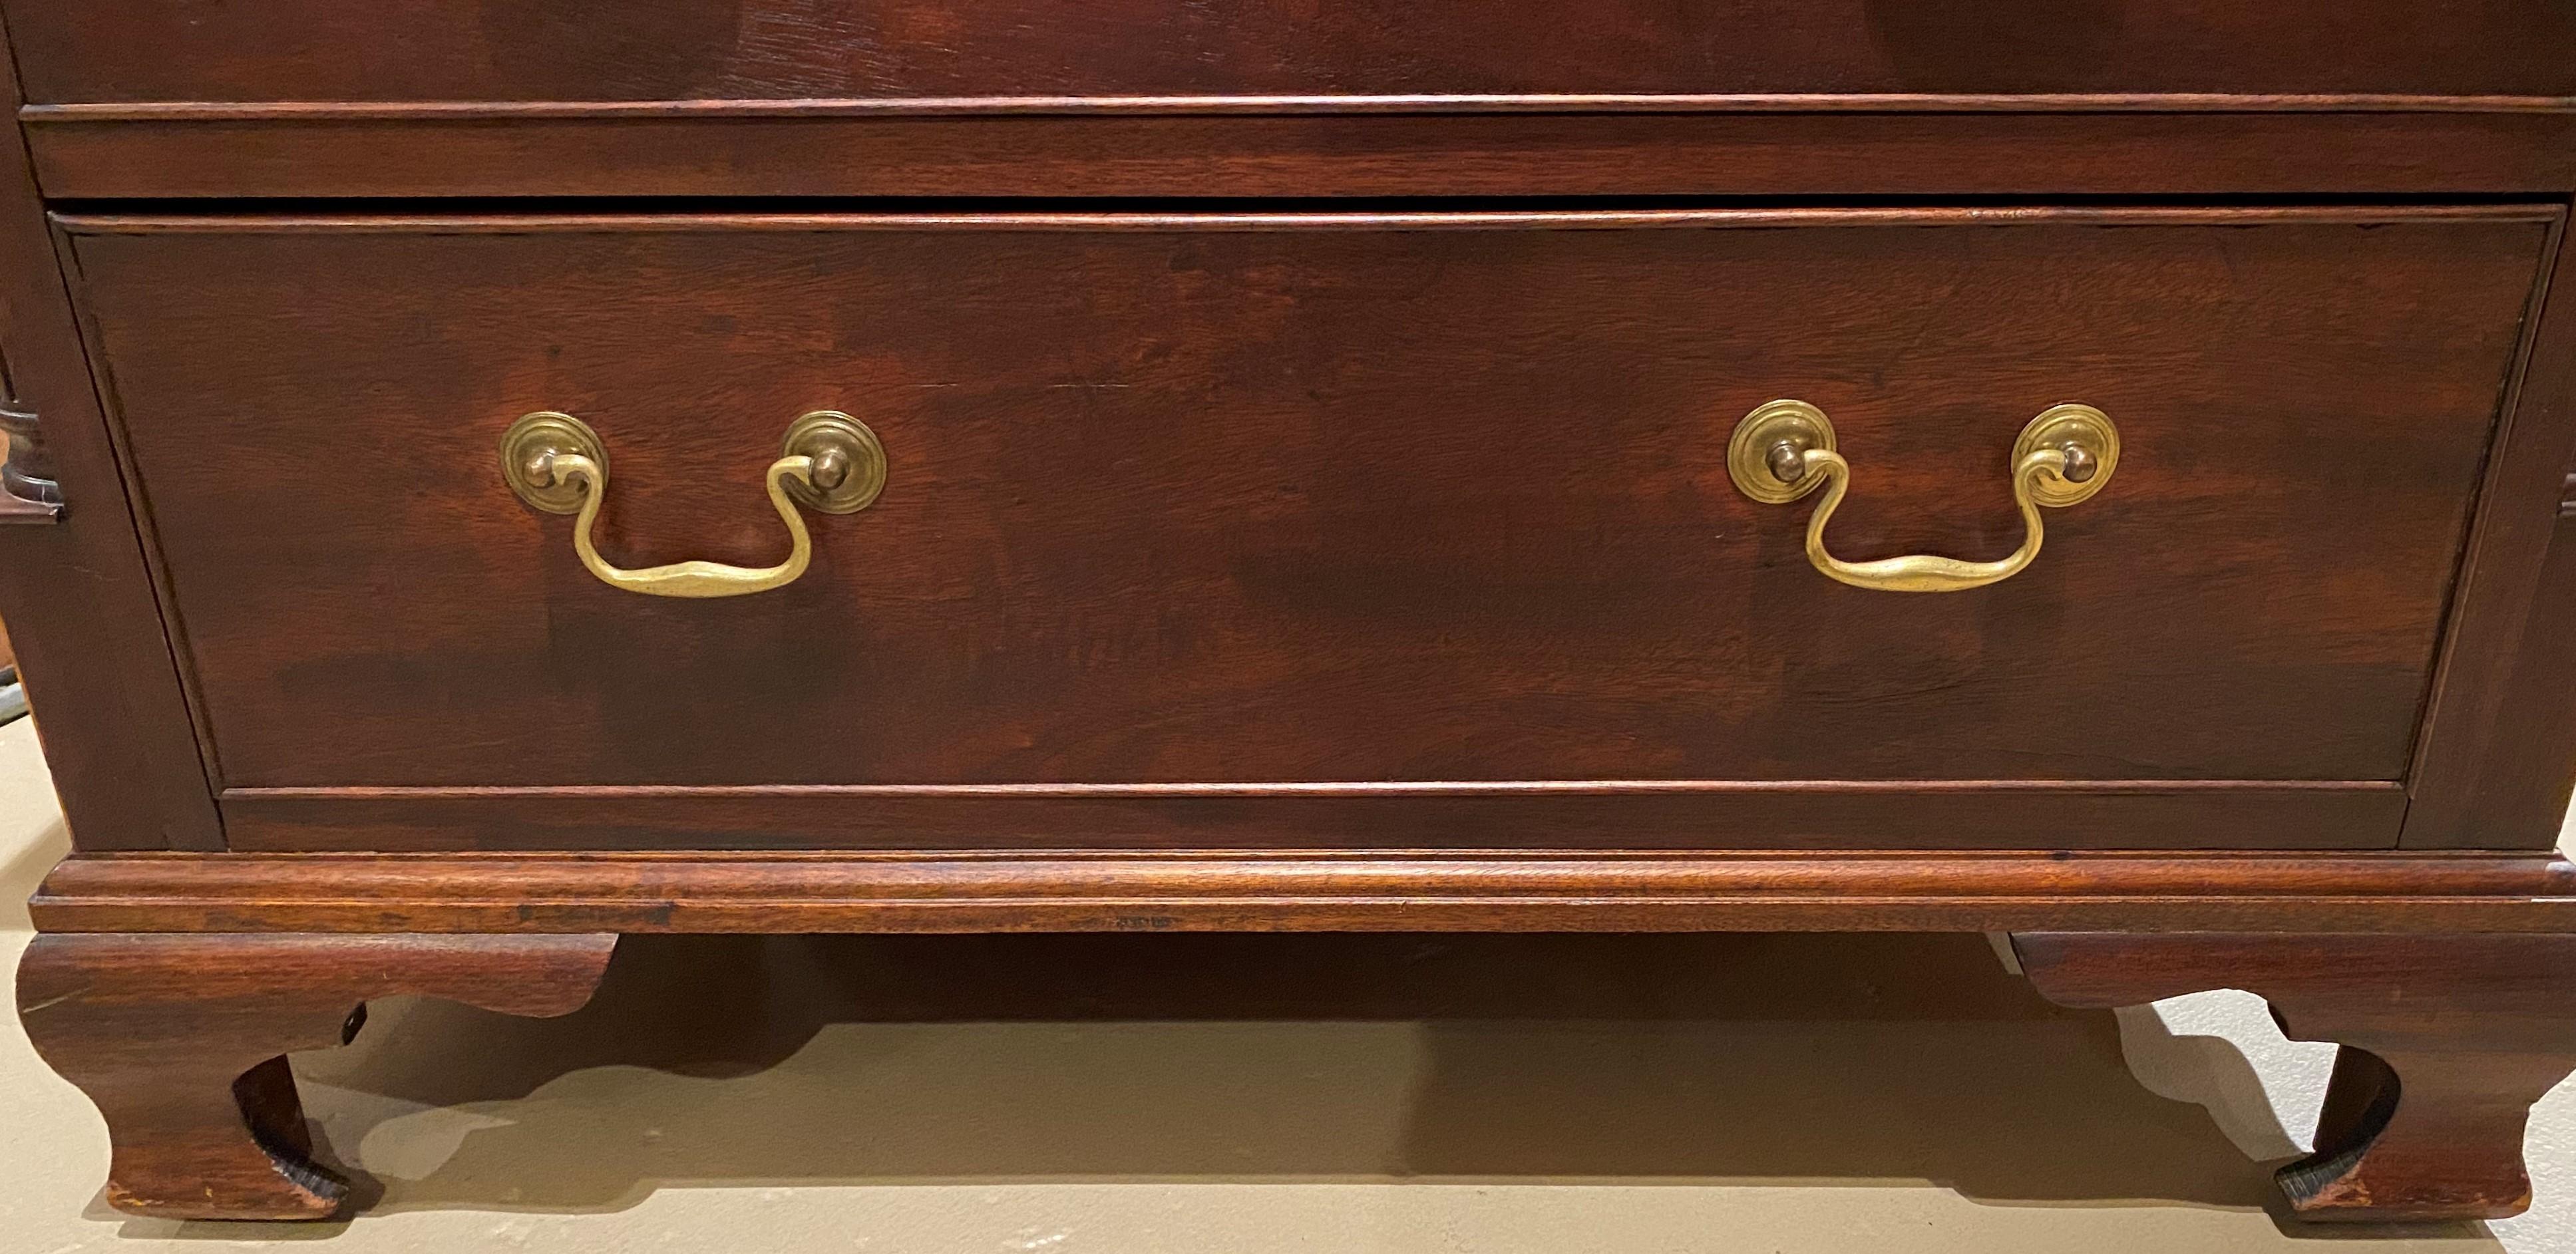 Hand-Carved Diminutive Chippendale Mahogany Chest Adapted From a Larger 18th Century Chest